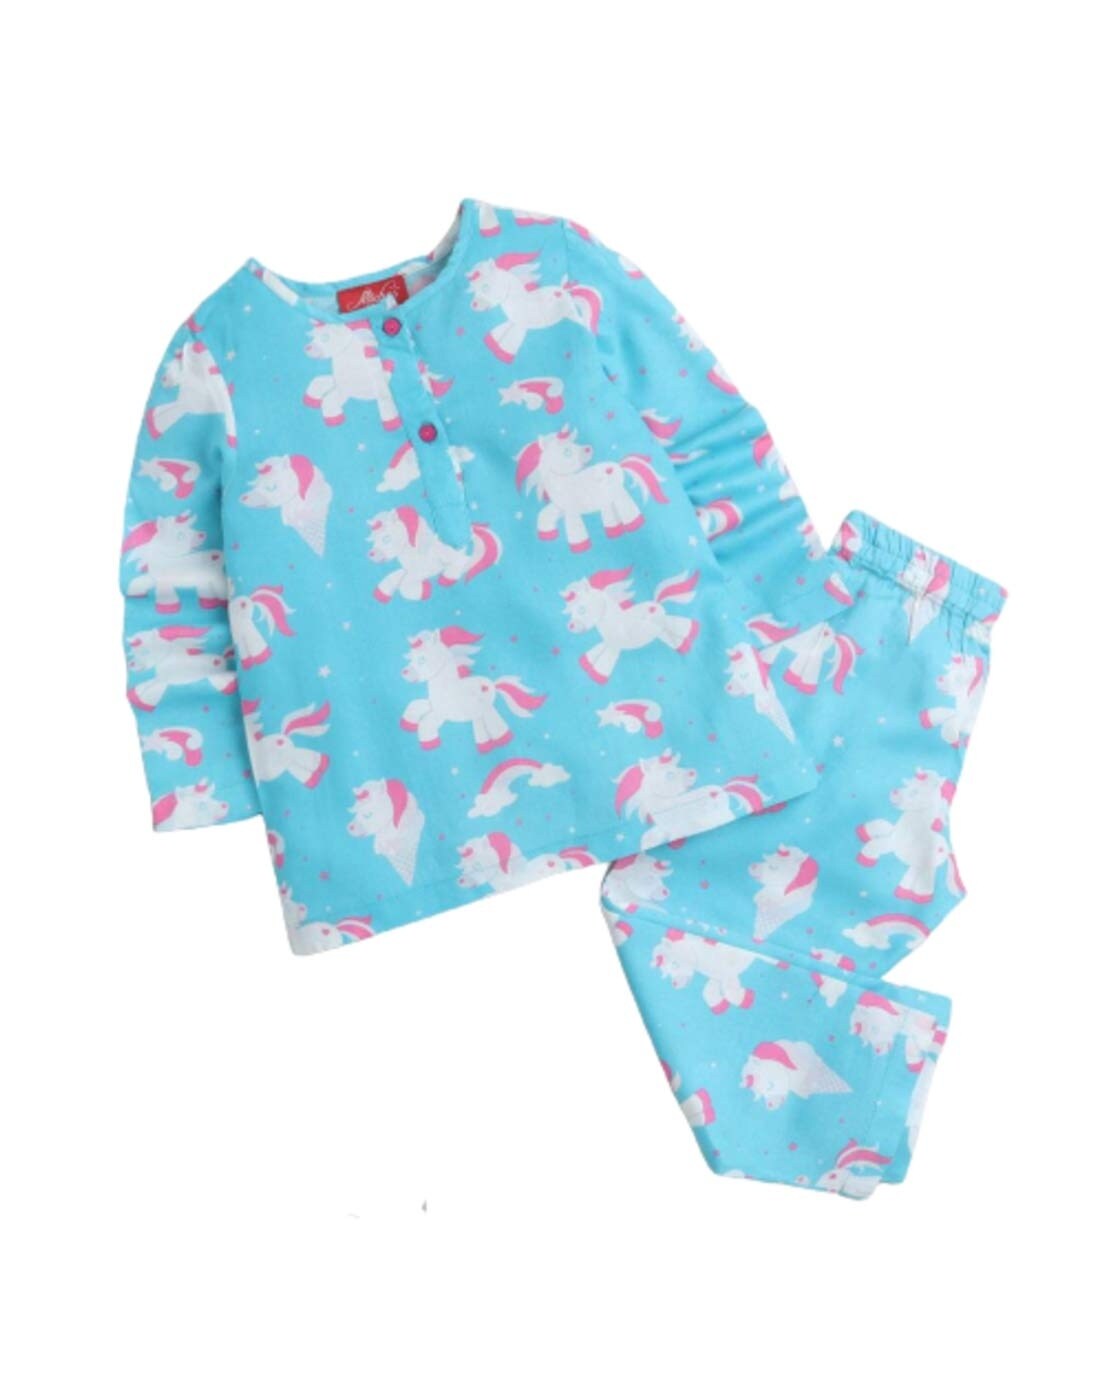 Buy Blue Nightsuit Sets for Girls by HOPSCOTCH Online 